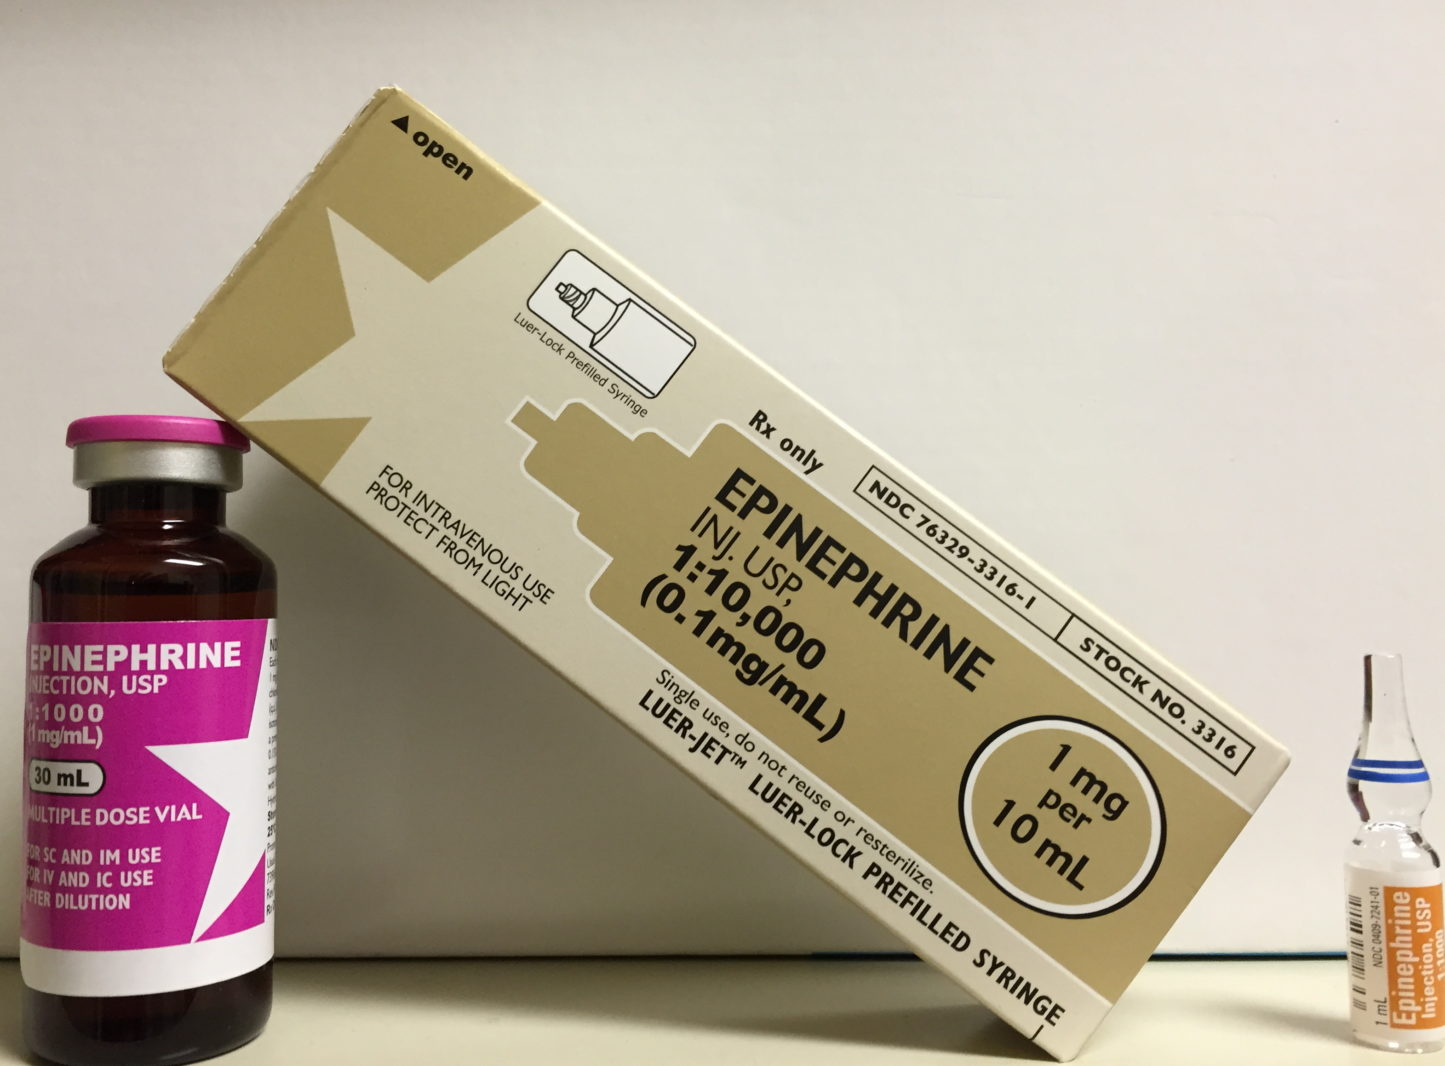 The Proper Disposal of Epinephrine (Everything You Need to Know)